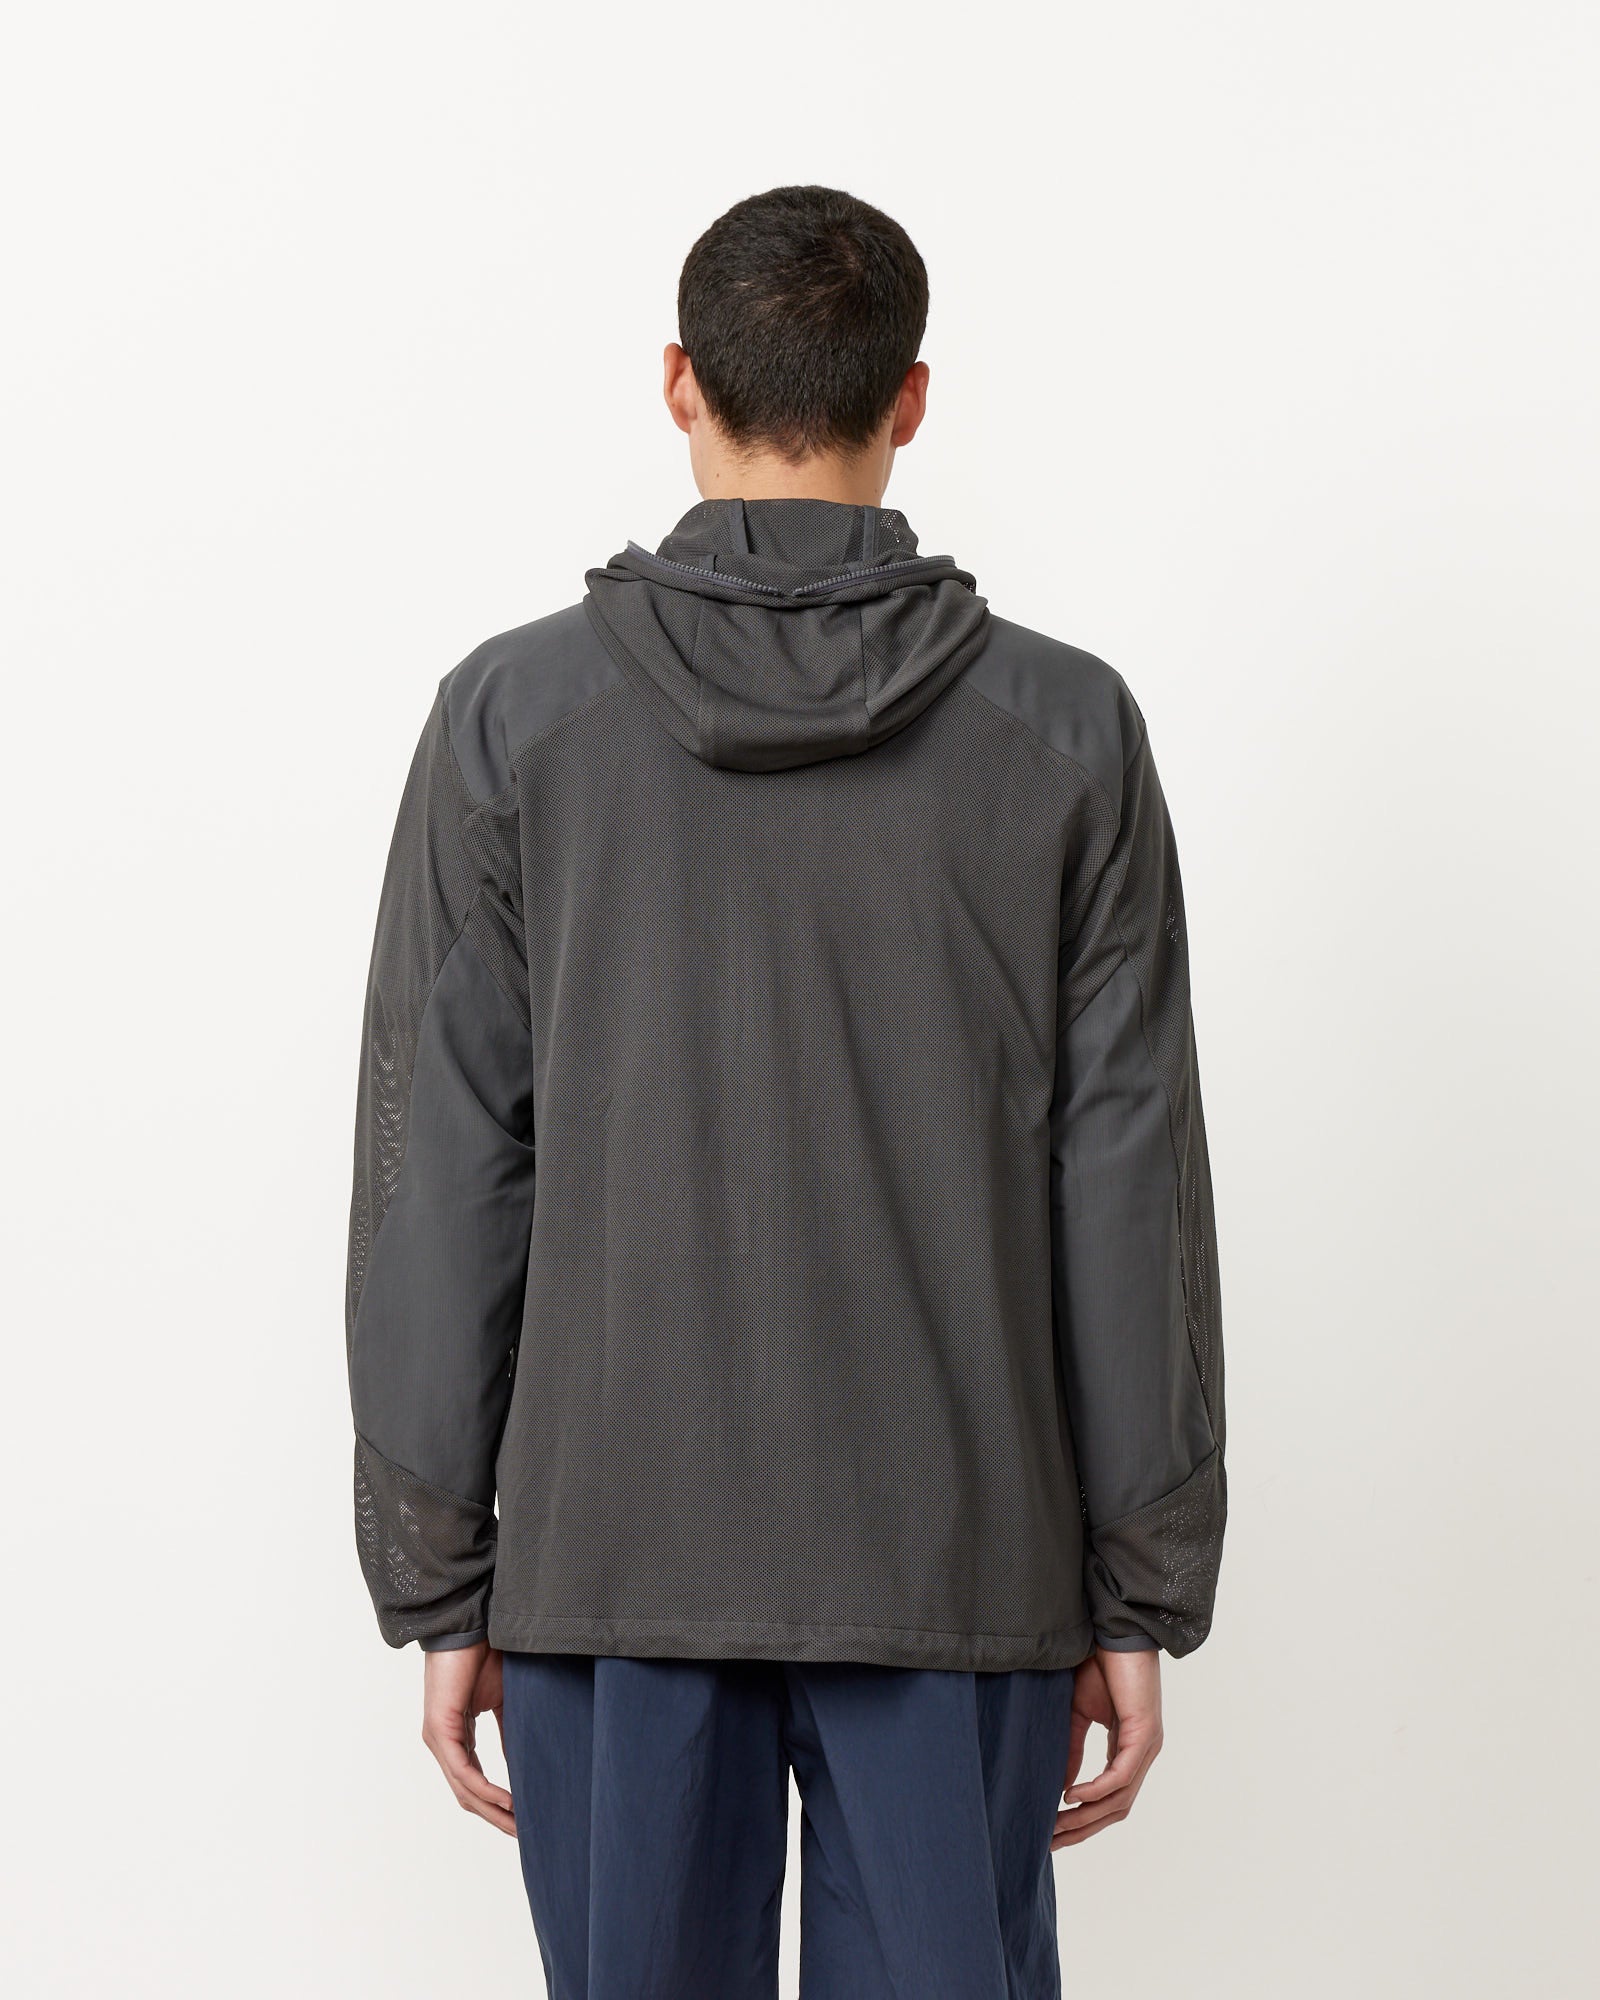 Insect Shield Mesh Jacket in Charcoal